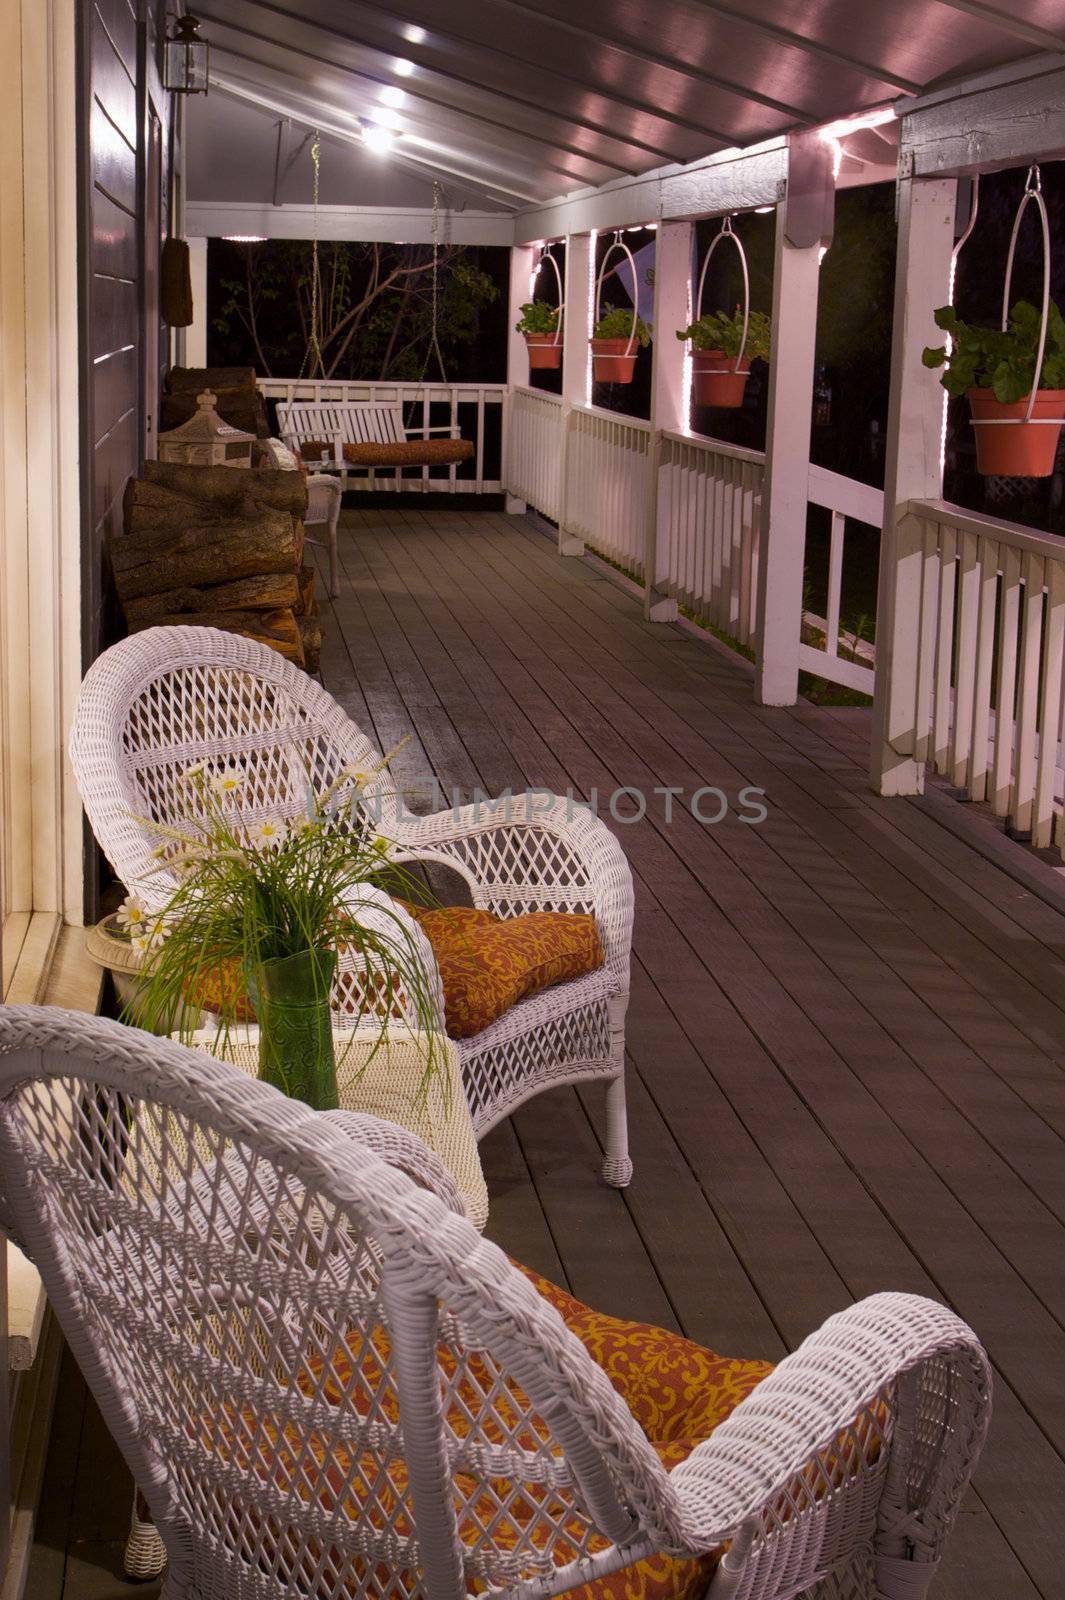 Image of front porch on a country home at night